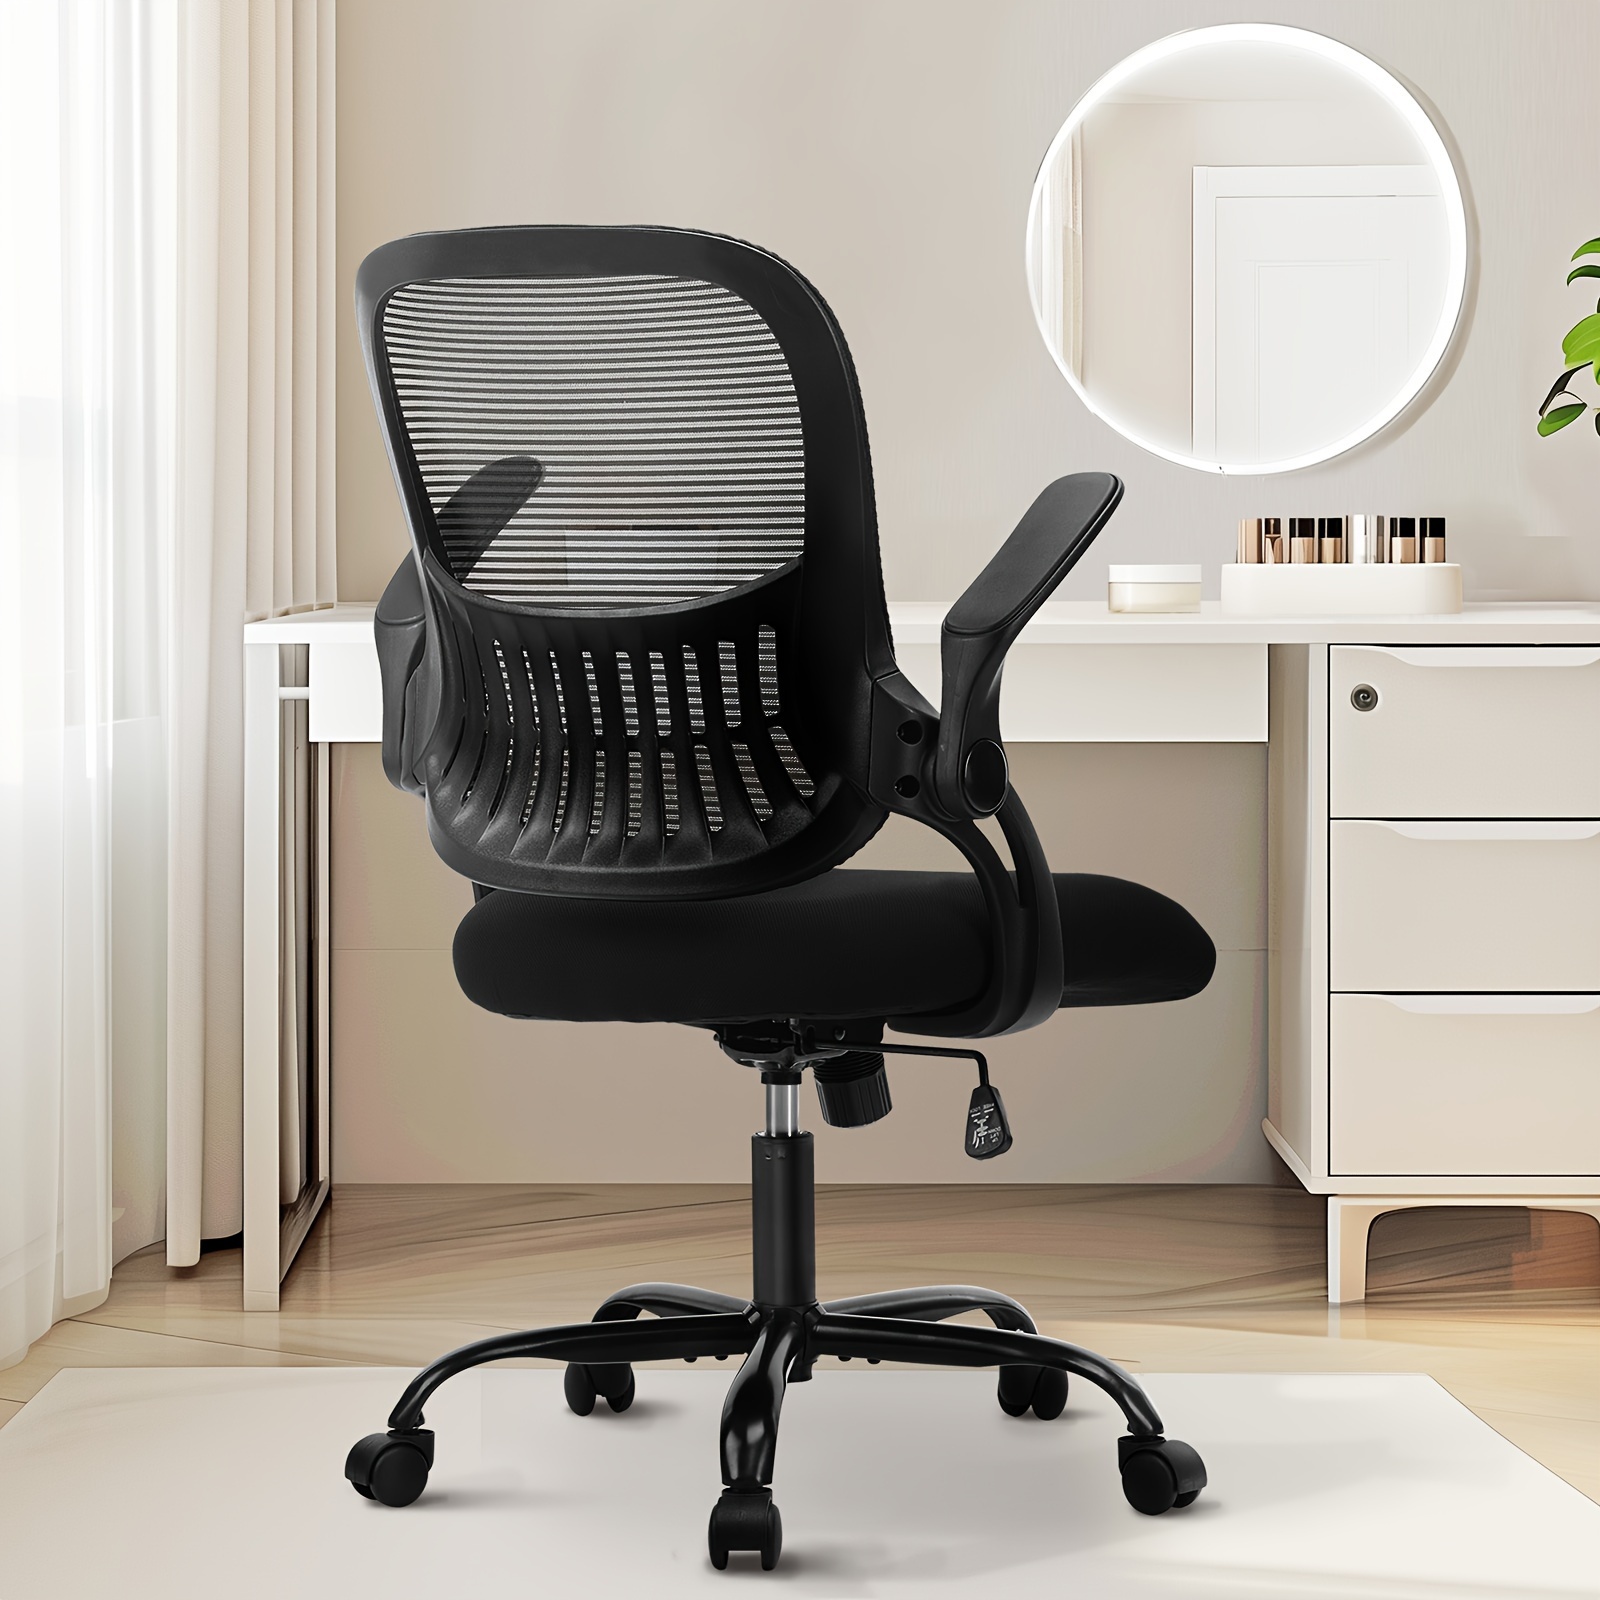 

Thicken Seat Cushion Mesh Chair With Adjustable High Back Lumbar Support And Flip-up Armrests, Executive Rolling Swivel Comfy Task Computer Chair For Home Office Chair, Ergonomic Desk Chair